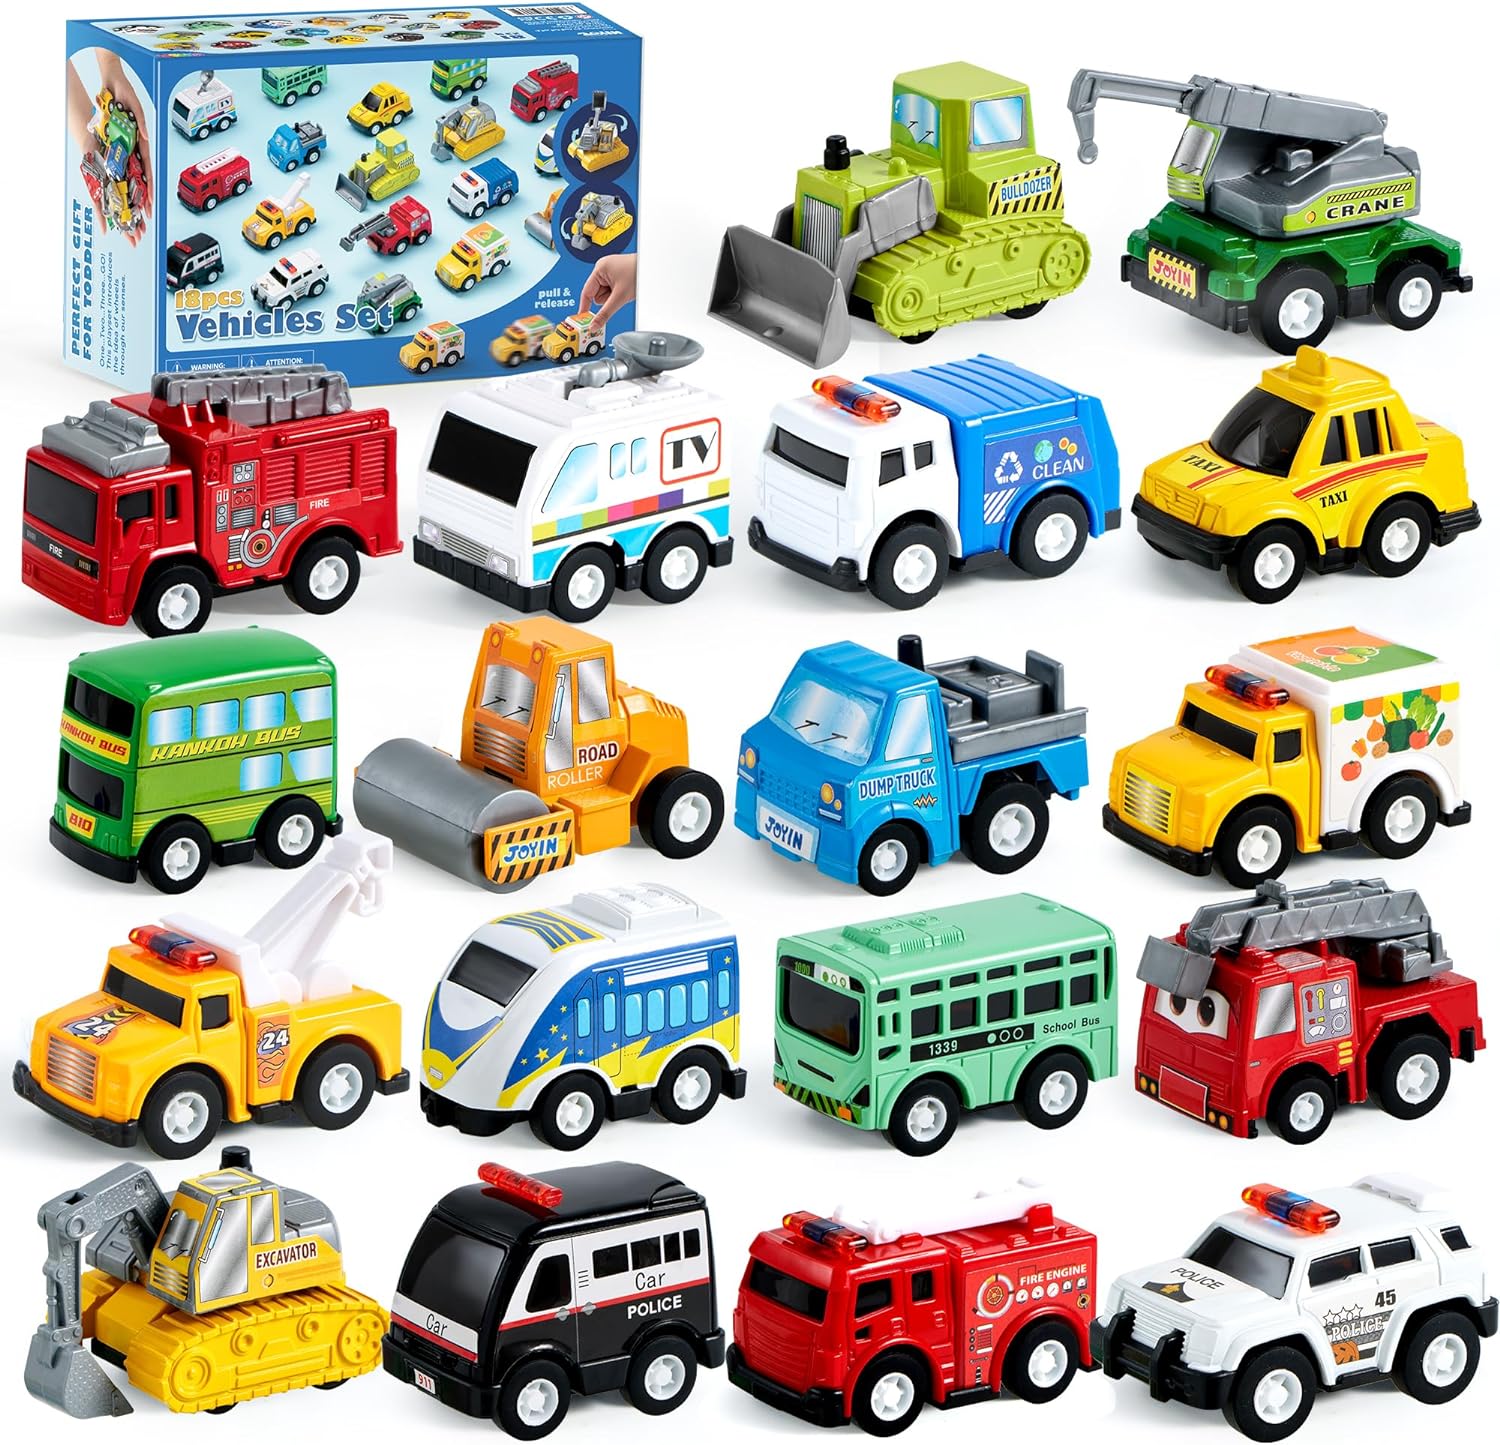 Read more about the article JOYIN 18 Pcs Pull Back City Cars and Trucks Toy Vehicles Set for ONLY $15.99 (Was $29.99)